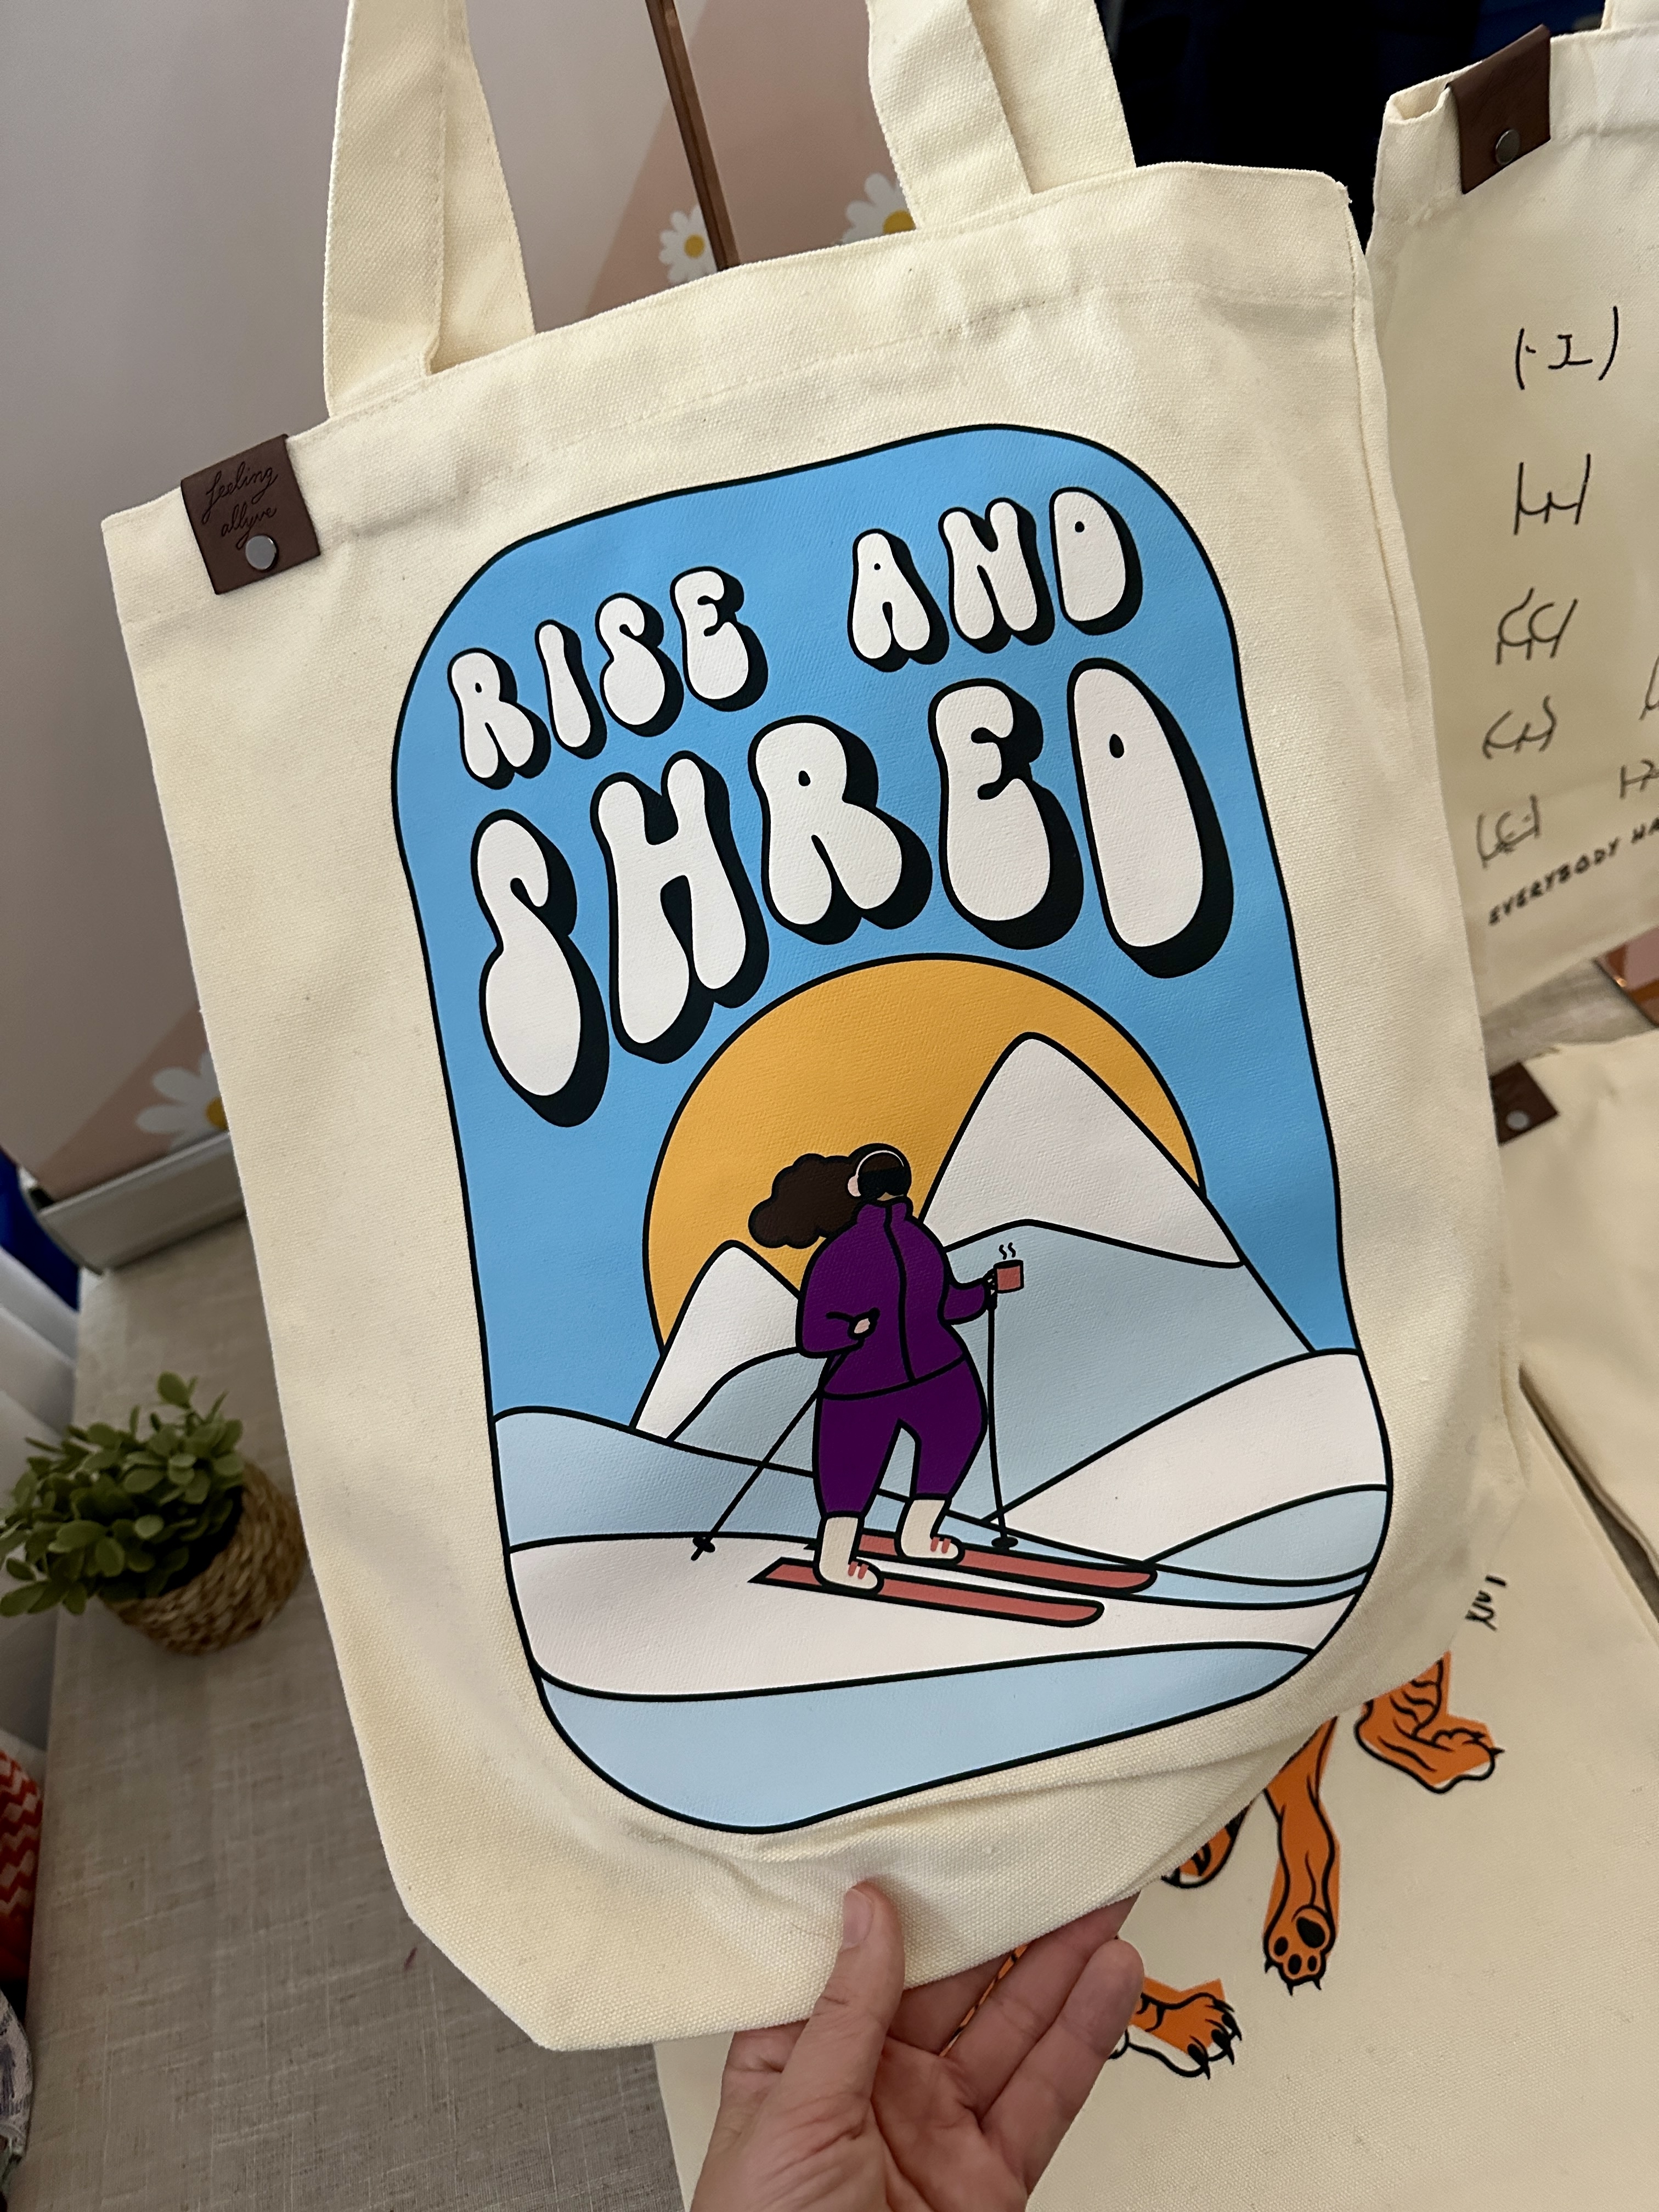 A tote bag that says &quot;Rise &amp;amp; Shred&quot;